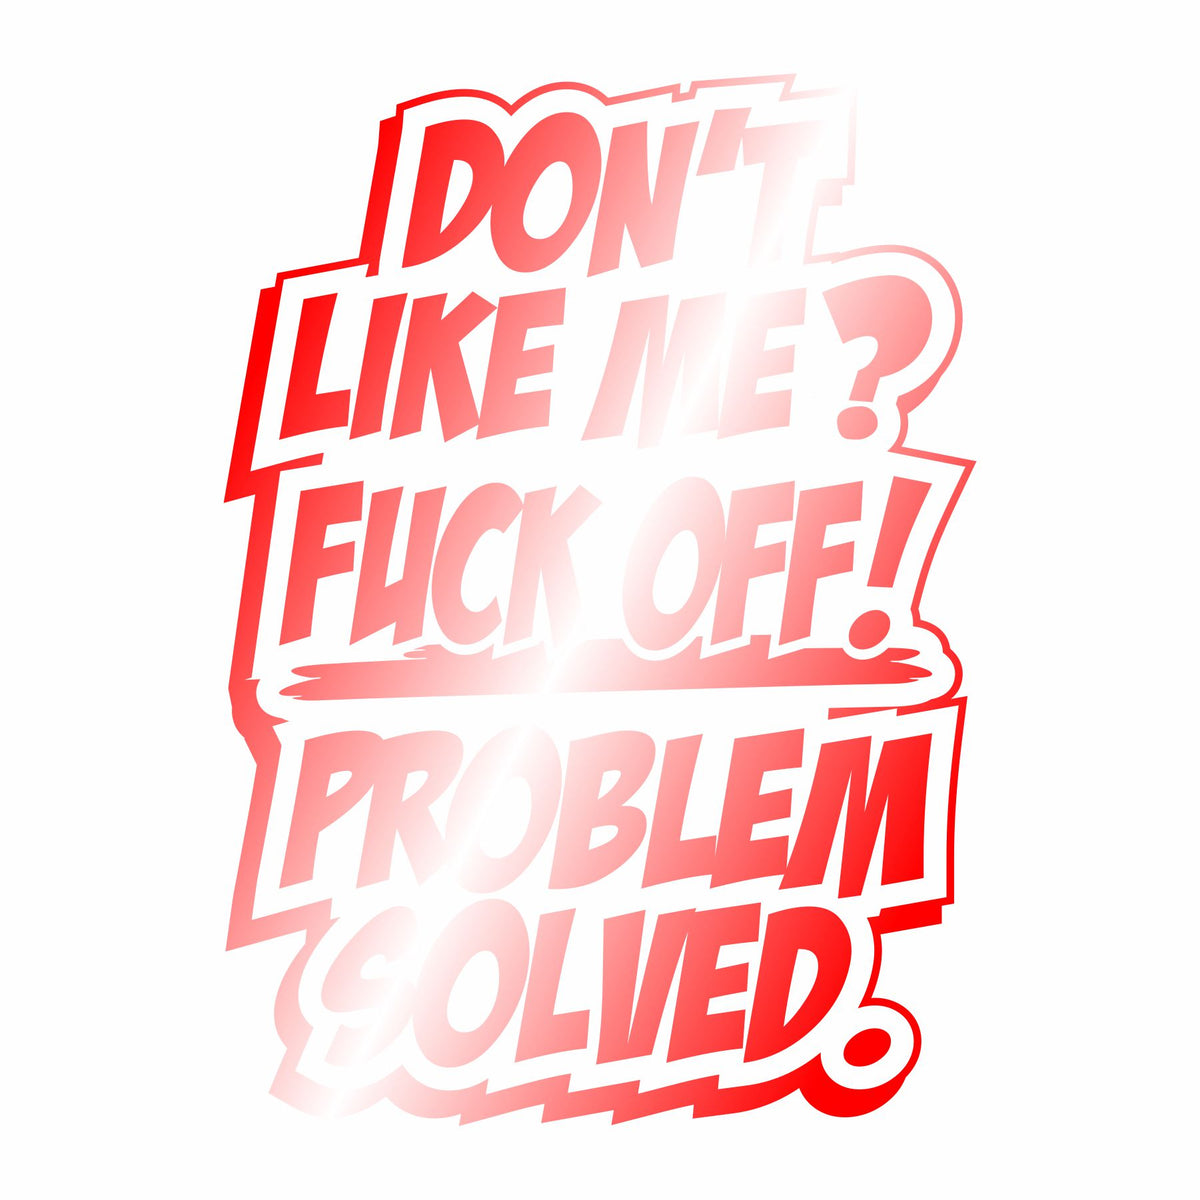 Don't Like Me - Fuck Off! Problem Solved - Vinyl Decal - Free Shipping